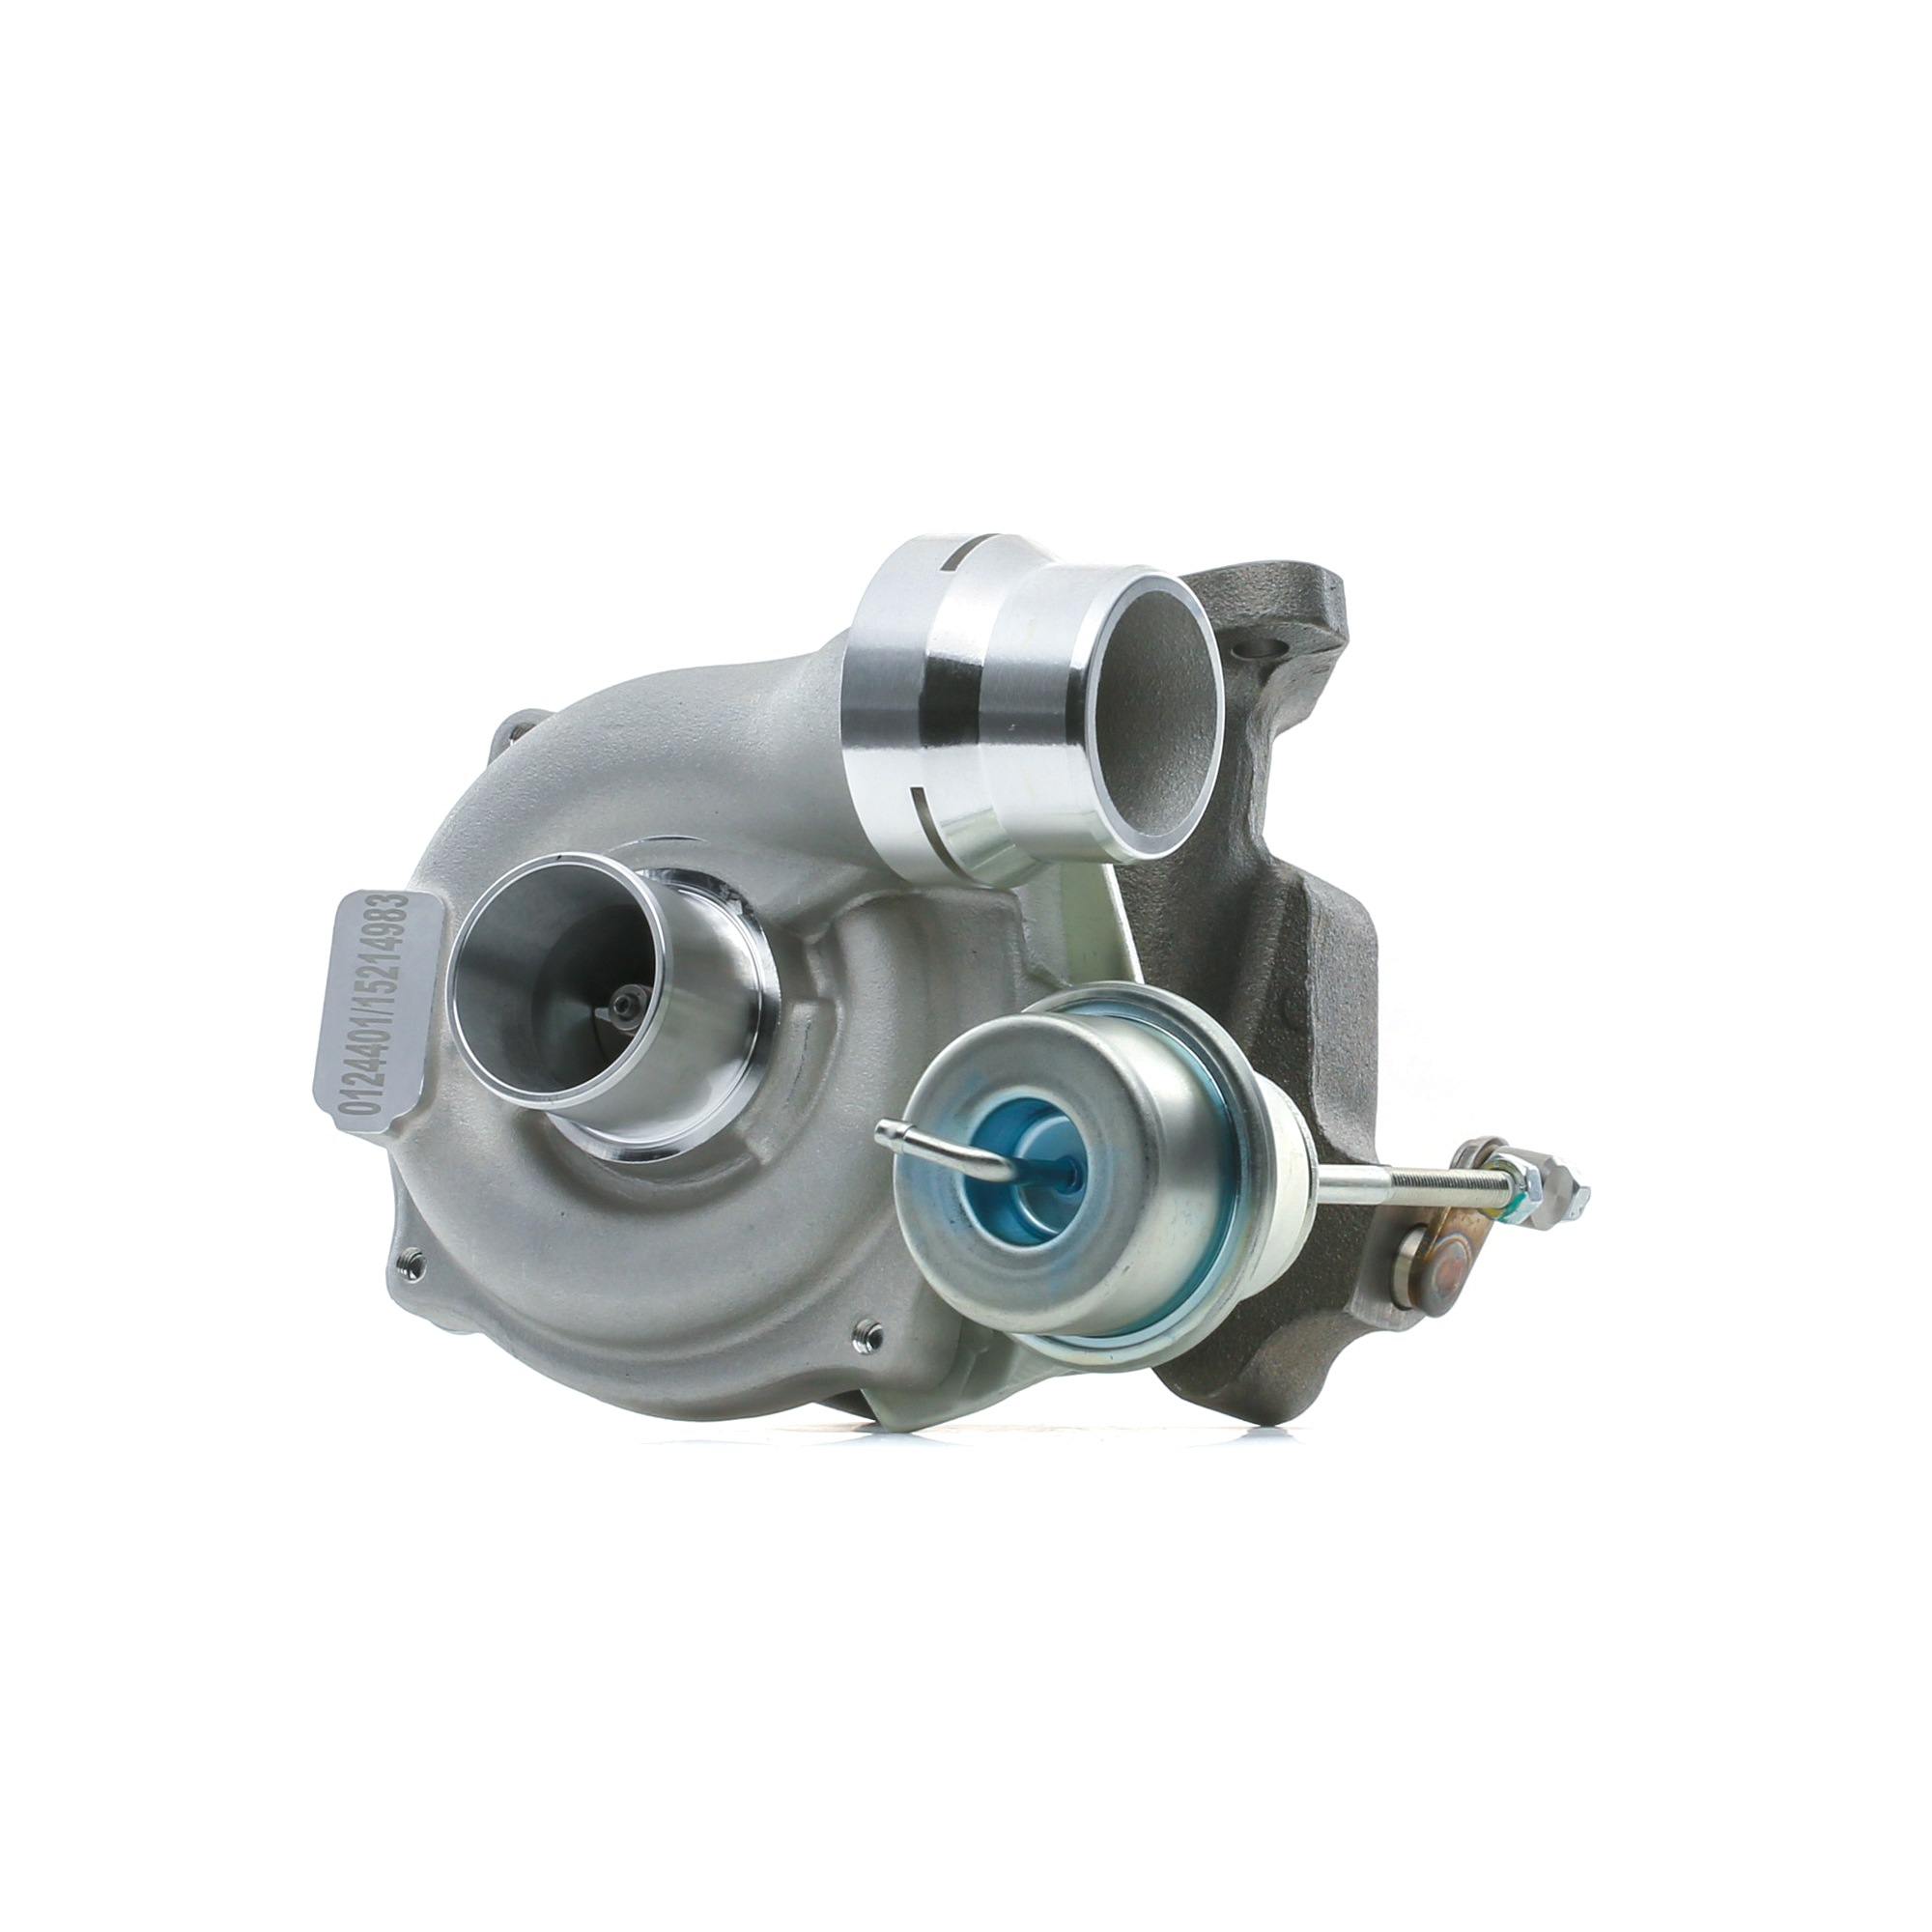 STARK SKCT-1190271 Turbocharger Exhaust Turbocharger, Pneumatic, with gaskets/seals